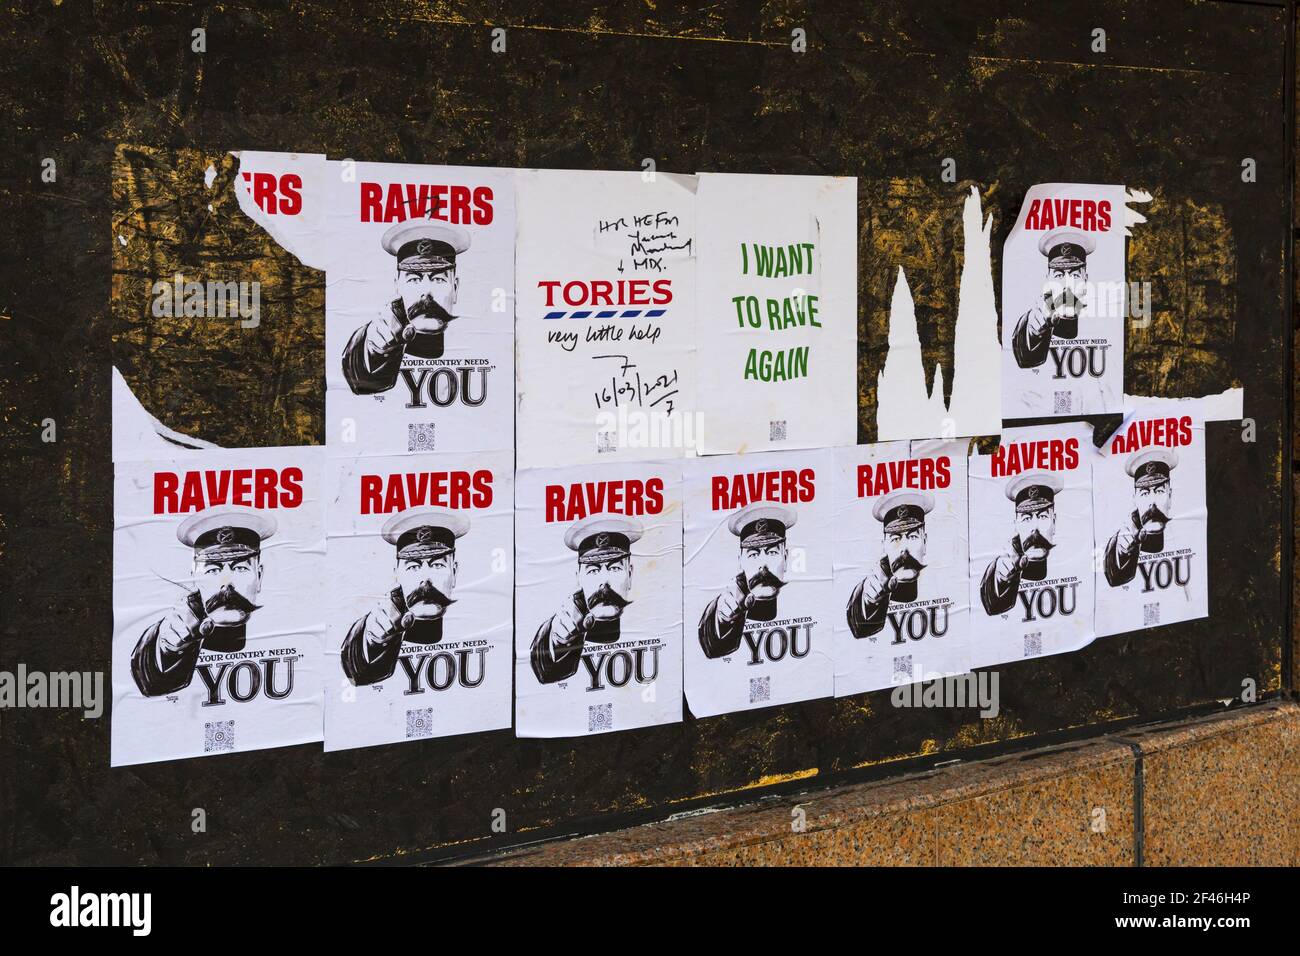 Ravers your country needs you, I want to rave again, Tories very little helps - torn posters on wall at Bournemouth, Dorset UK in March Stock Photo